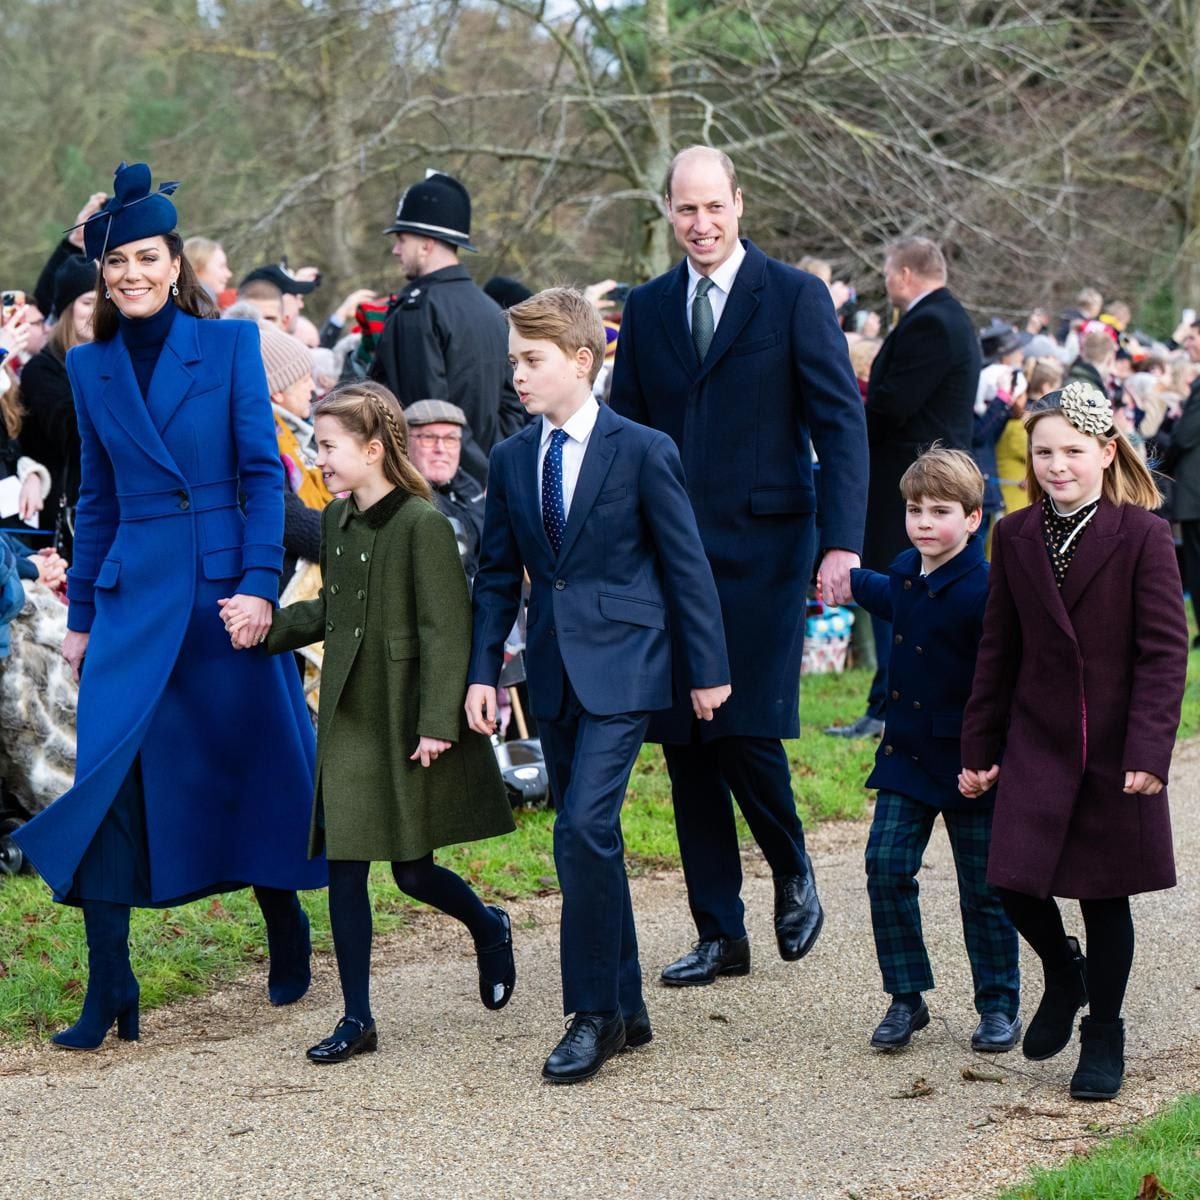 The Wales family attended service on Christmas morning together. Prince Louis made his royal Christmas walk debut last year.